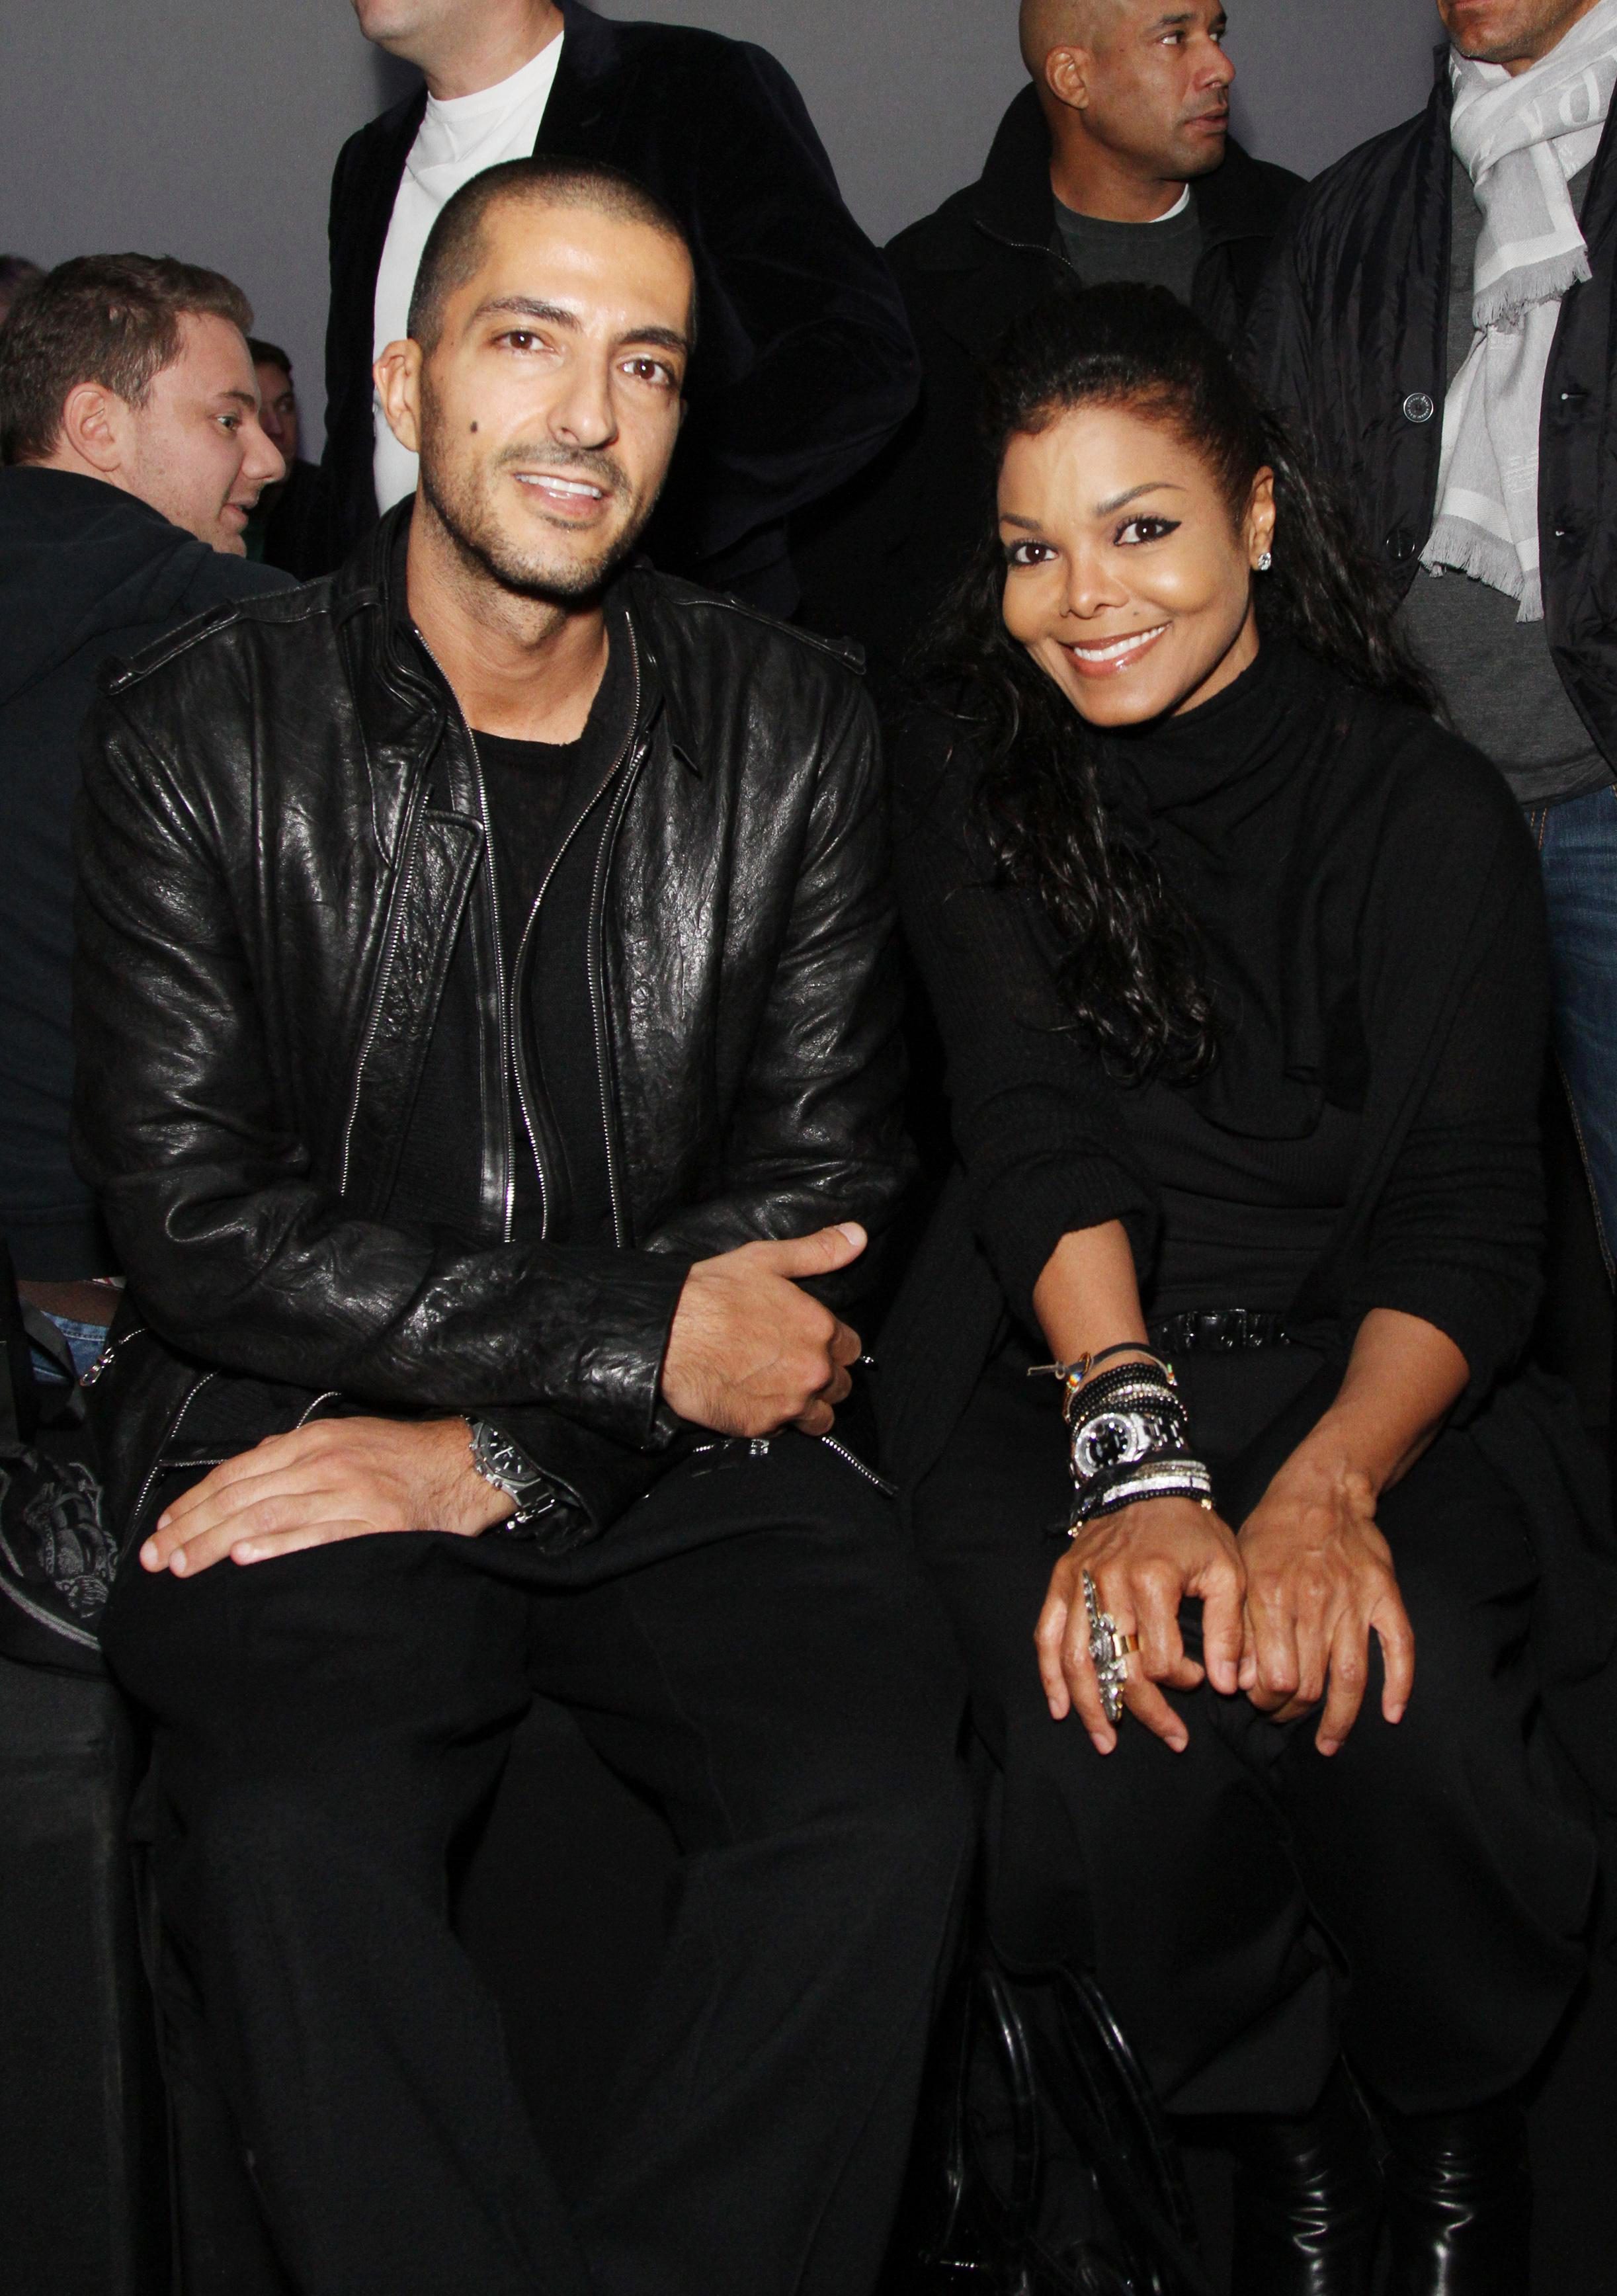 Eissa Al Mana's parents, Wissam Al Mana and Janet Jackson at an event together